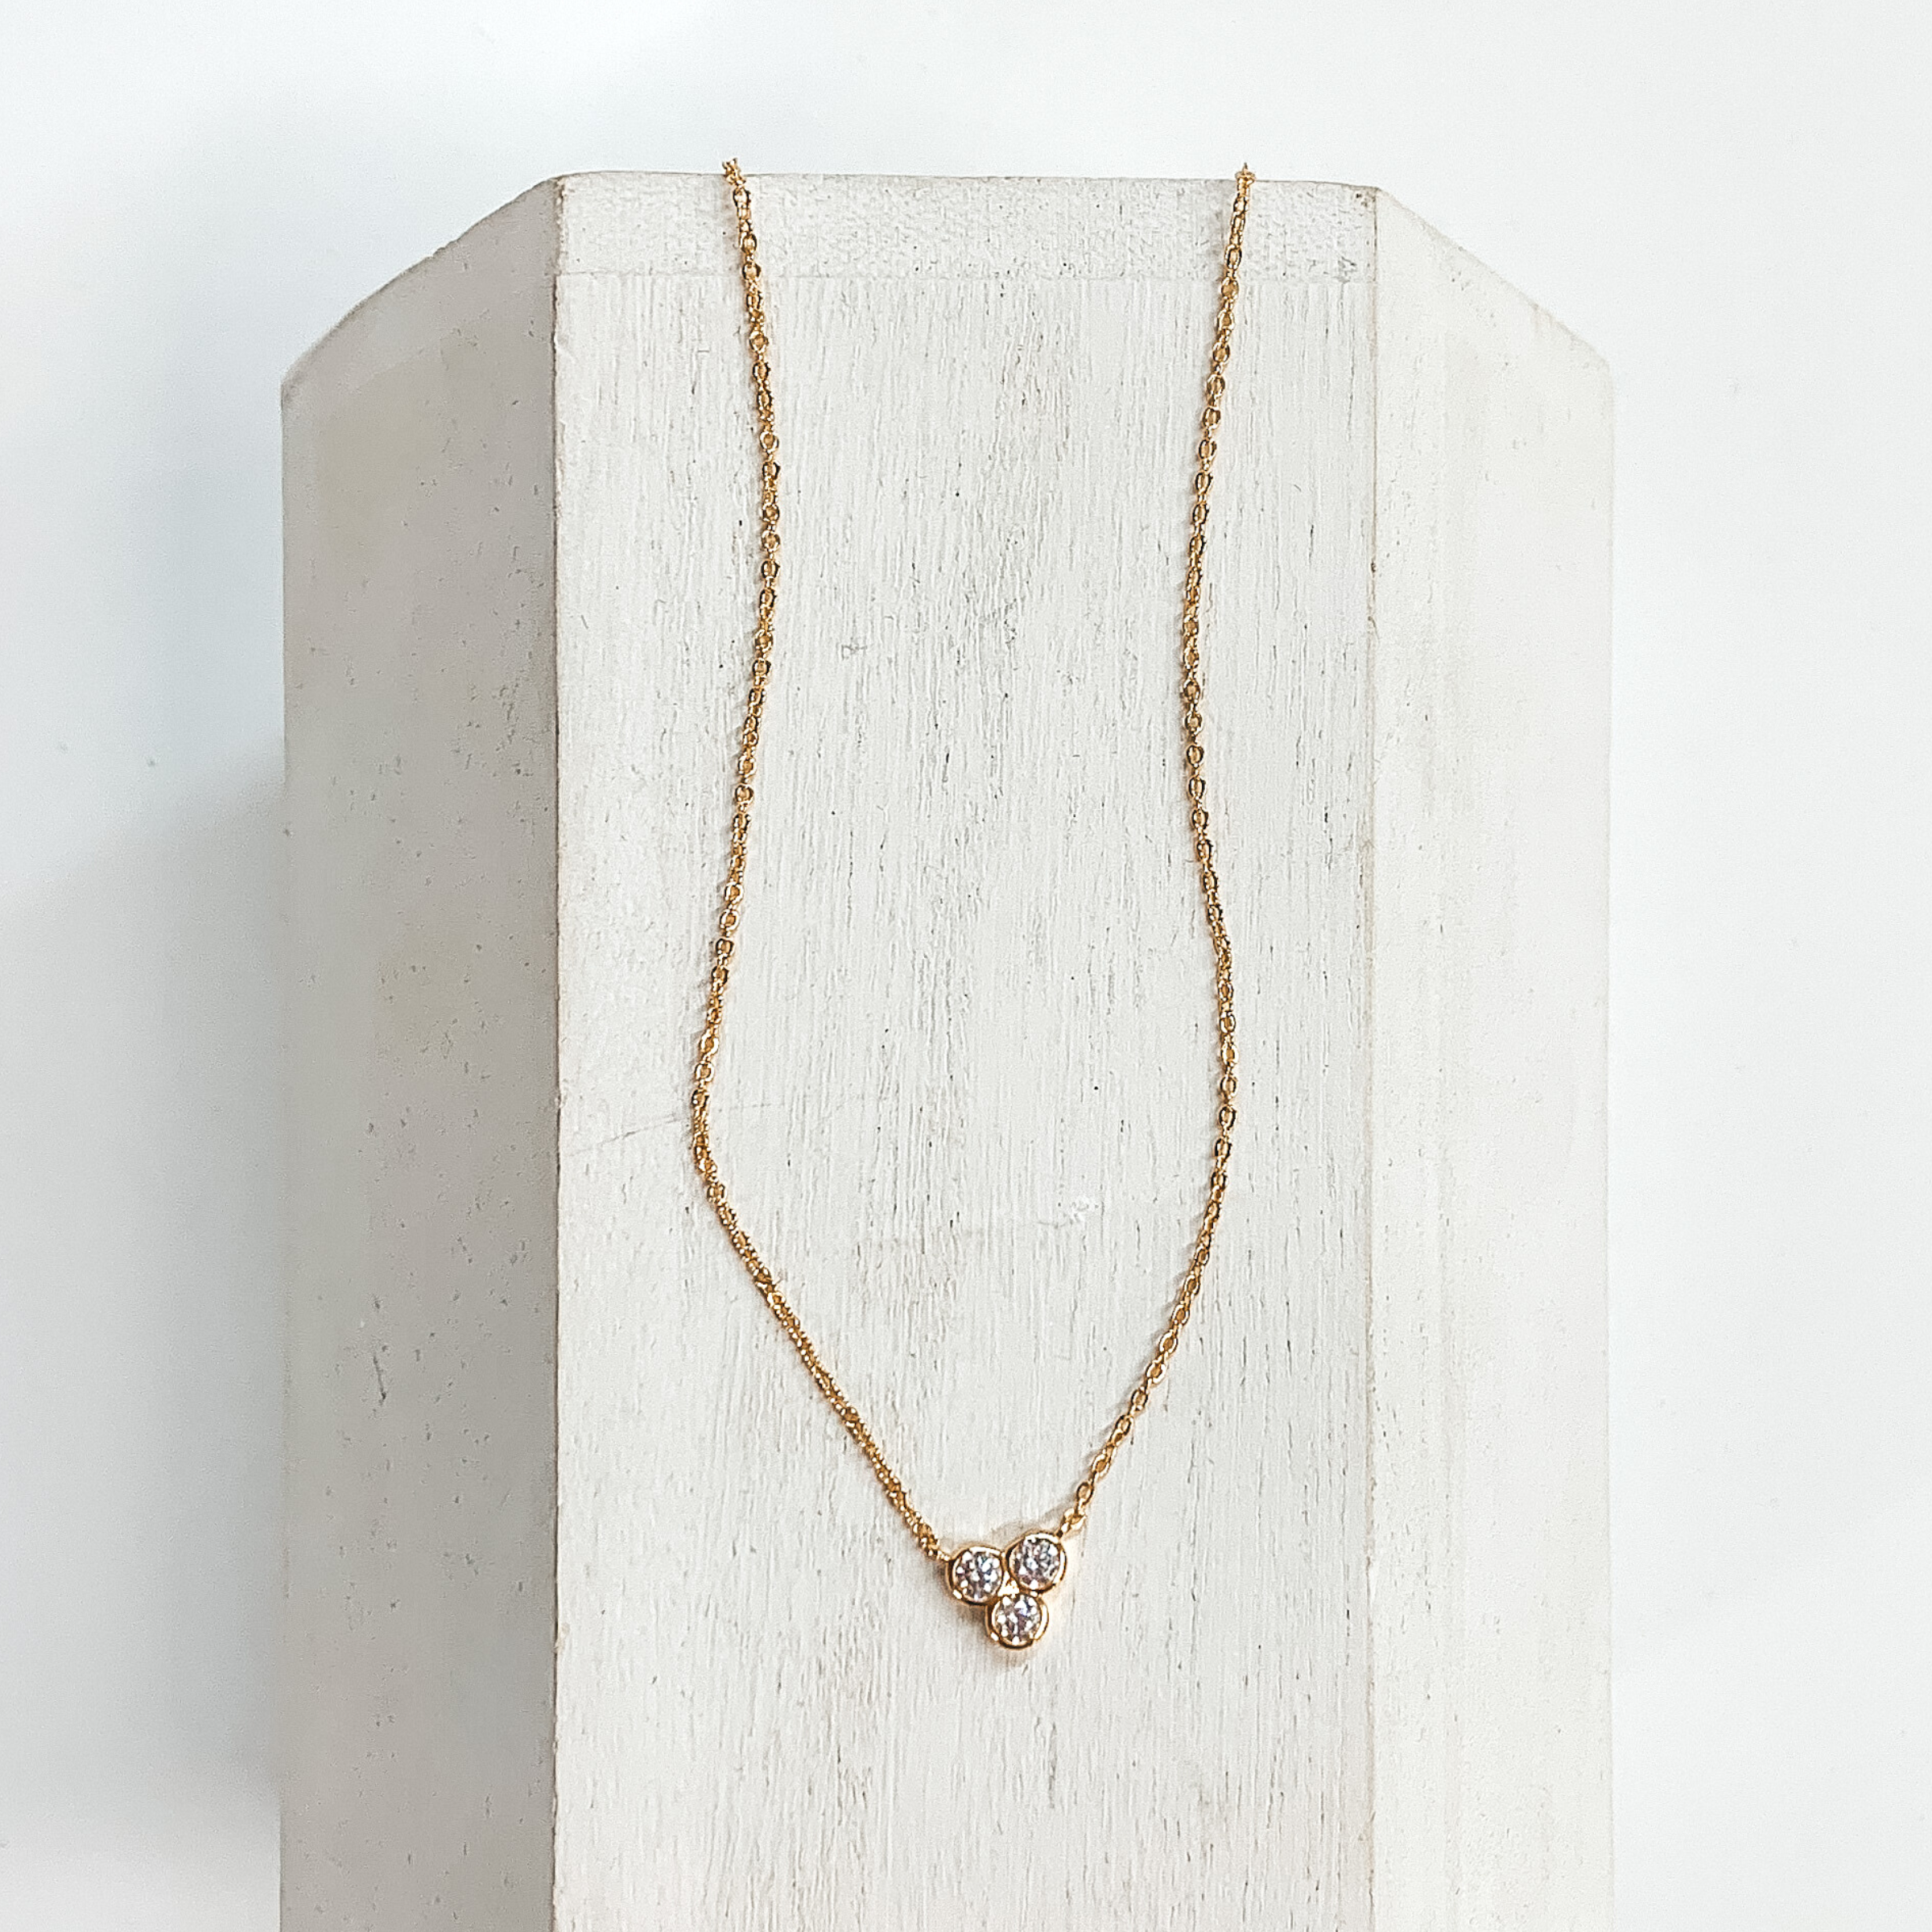 Thin gold chain necklace with CZ crystals in a cluster in the center. This  necklace is taken on a white block and a white background.